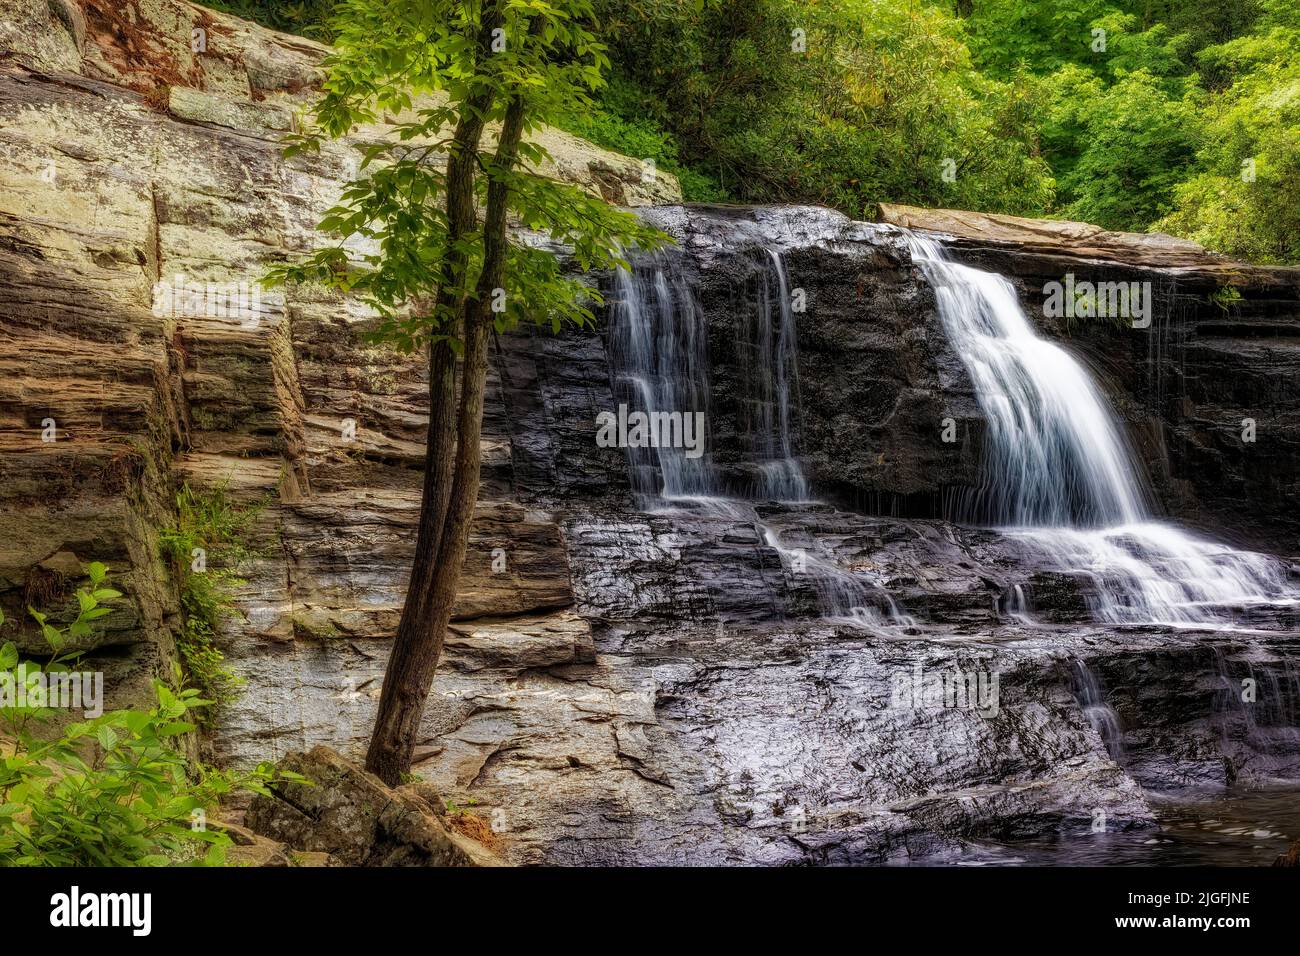 Hooker Falls is one of  four major waterfalls on the Little River in North Carolina's Dupont Forest. Stock Photo